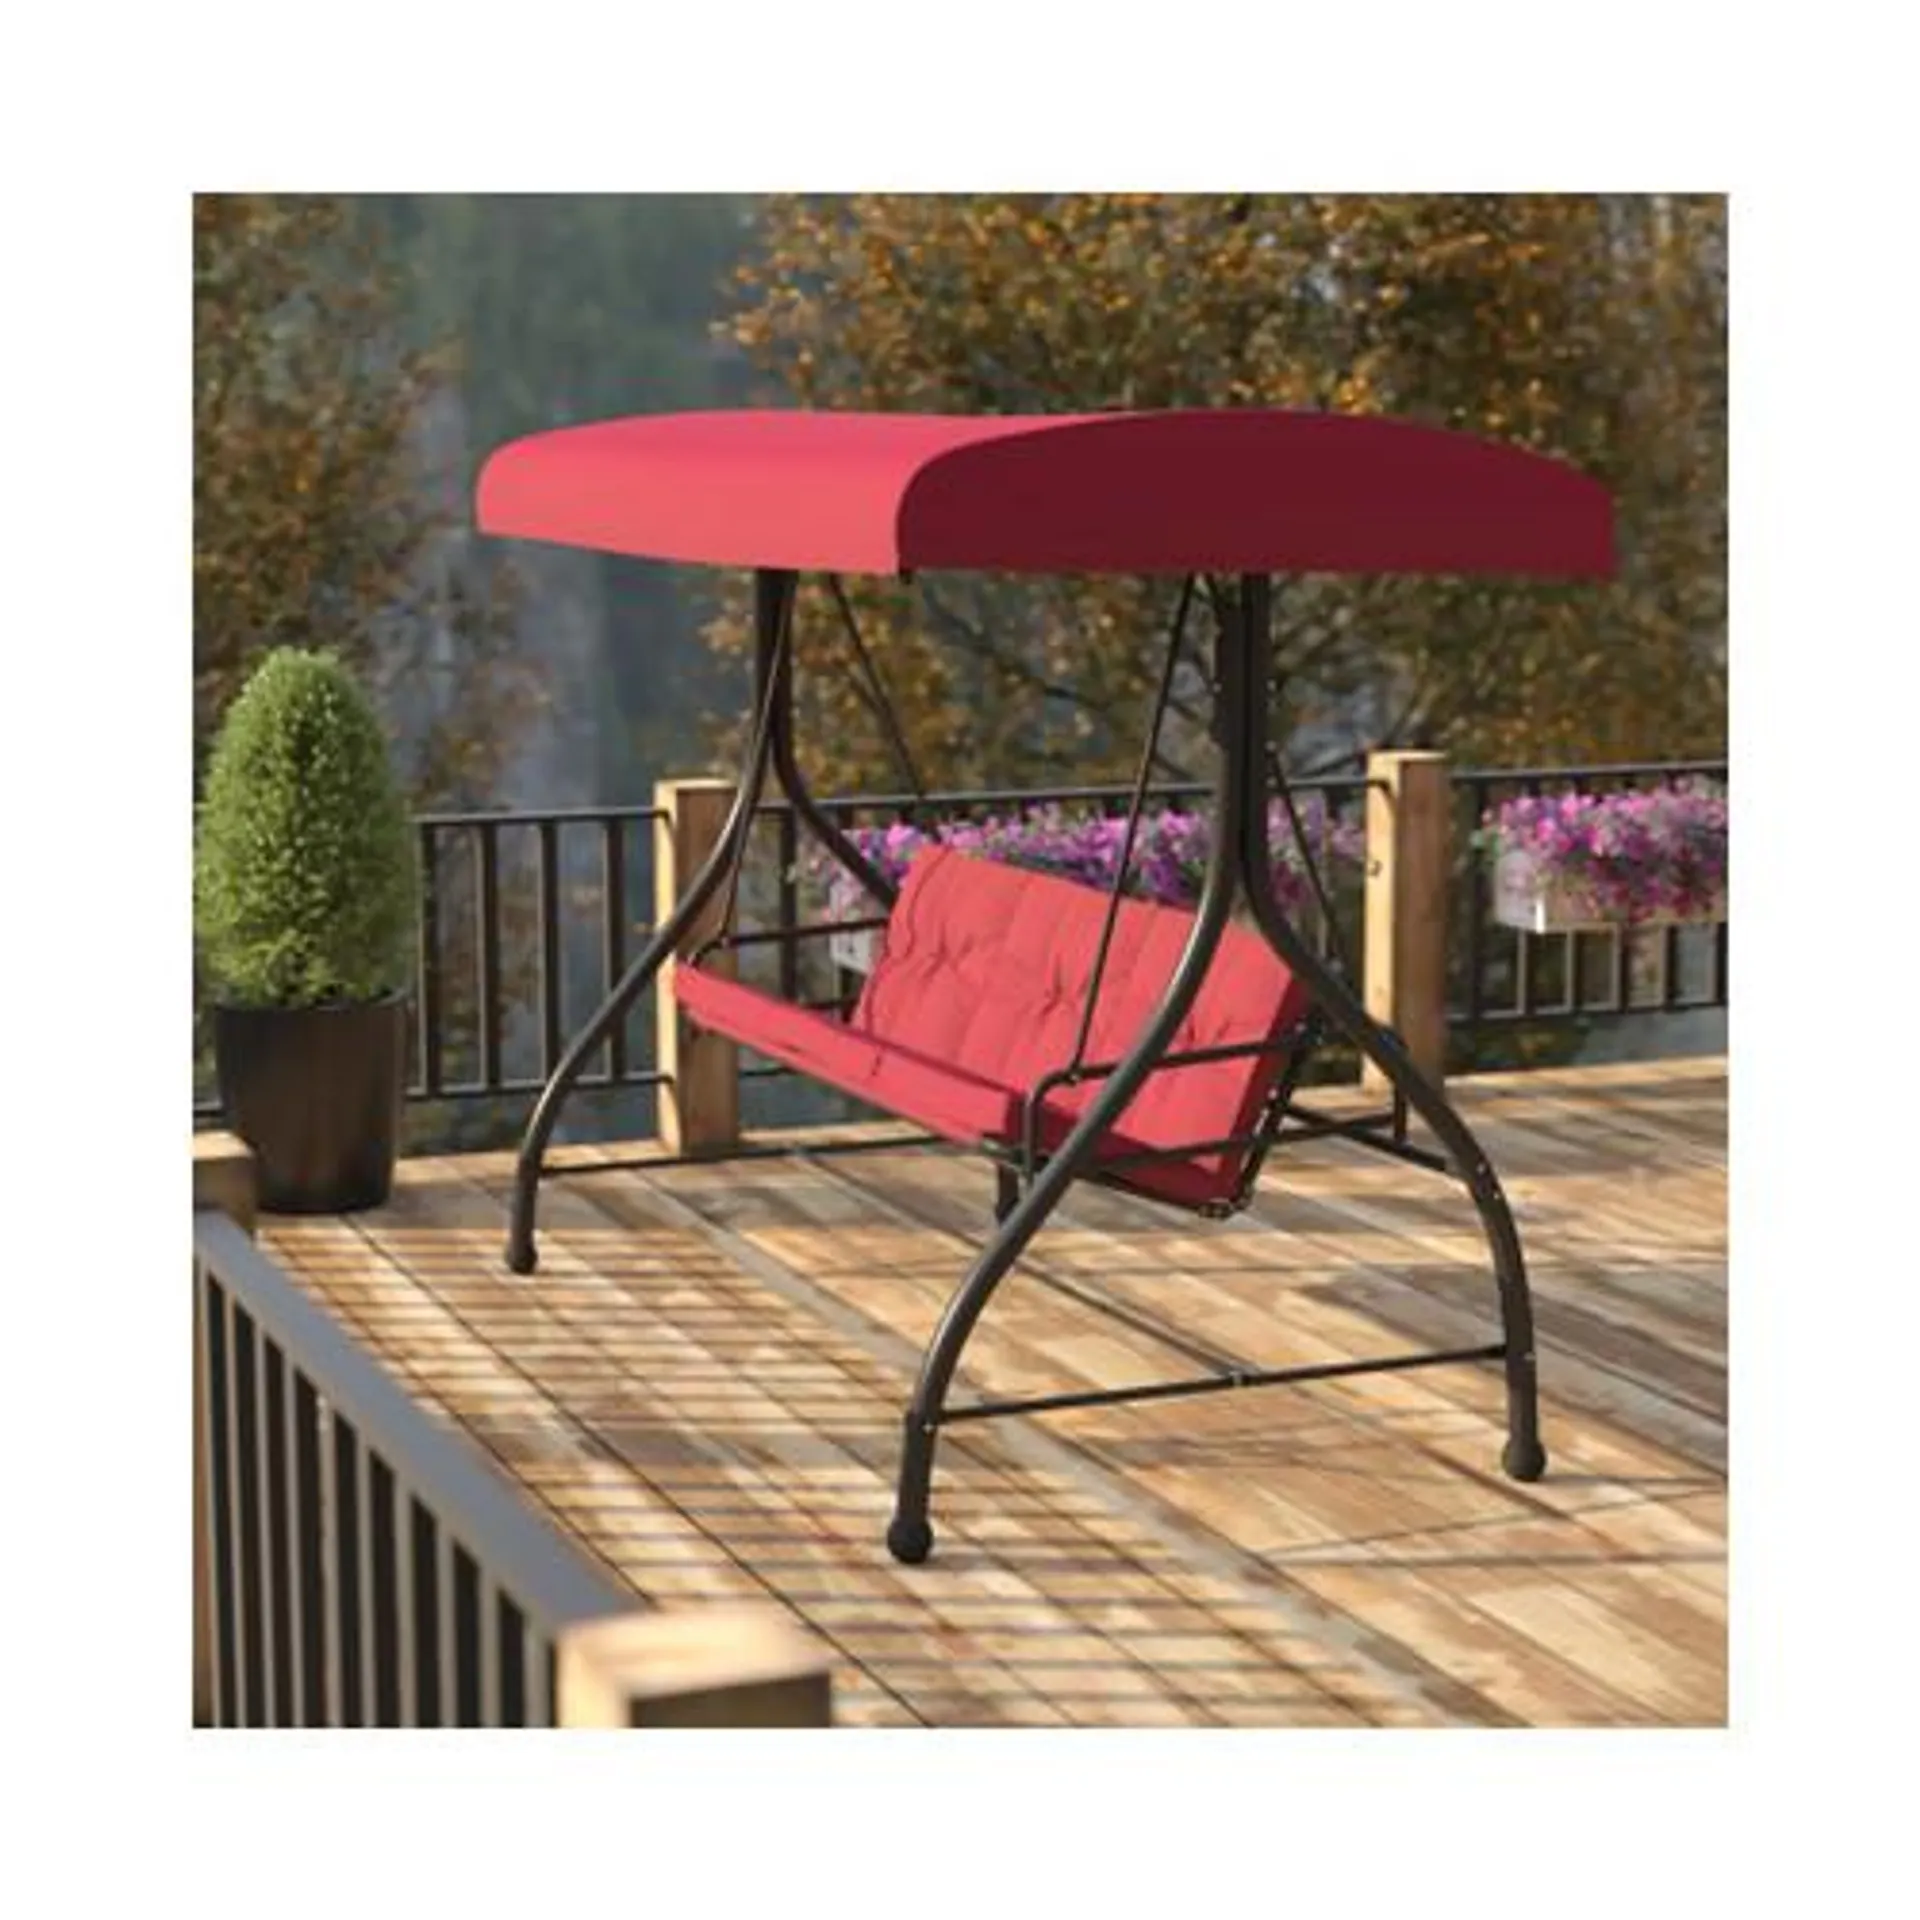 3-Seat Outdoor Steel Converting Patio Swing Canopy Hammock with Cushions / Outdoor Swing Bed (Maroon) - TLH007MRNGG